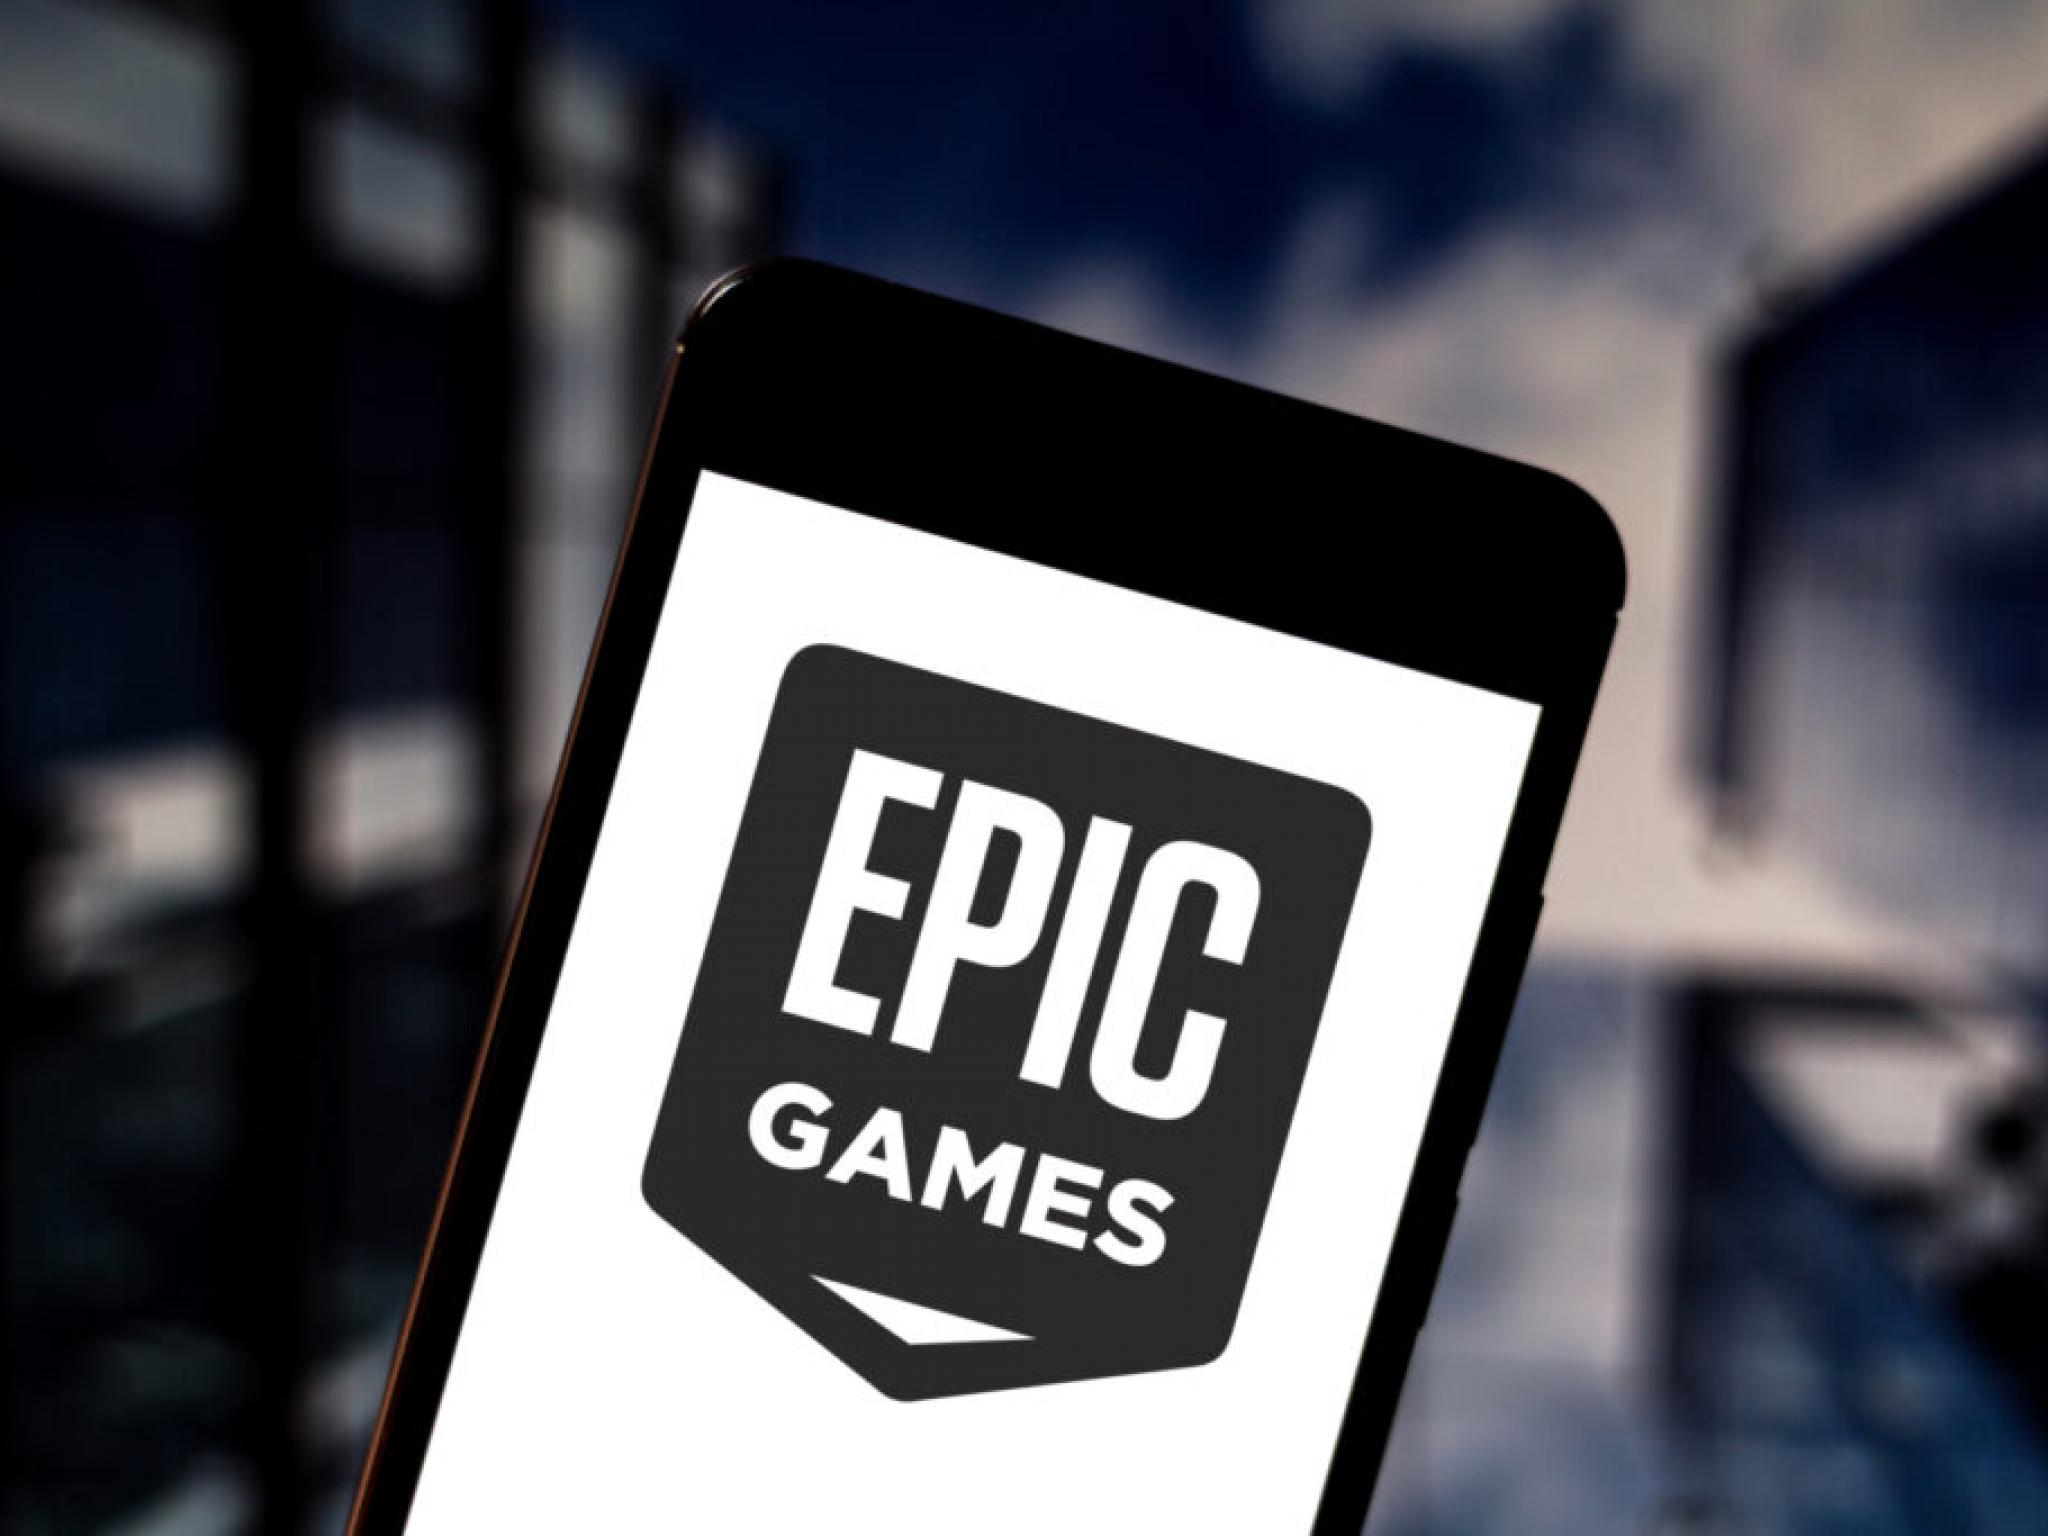  epic-games-announces-expansion-to-ios-and-android-platforms 